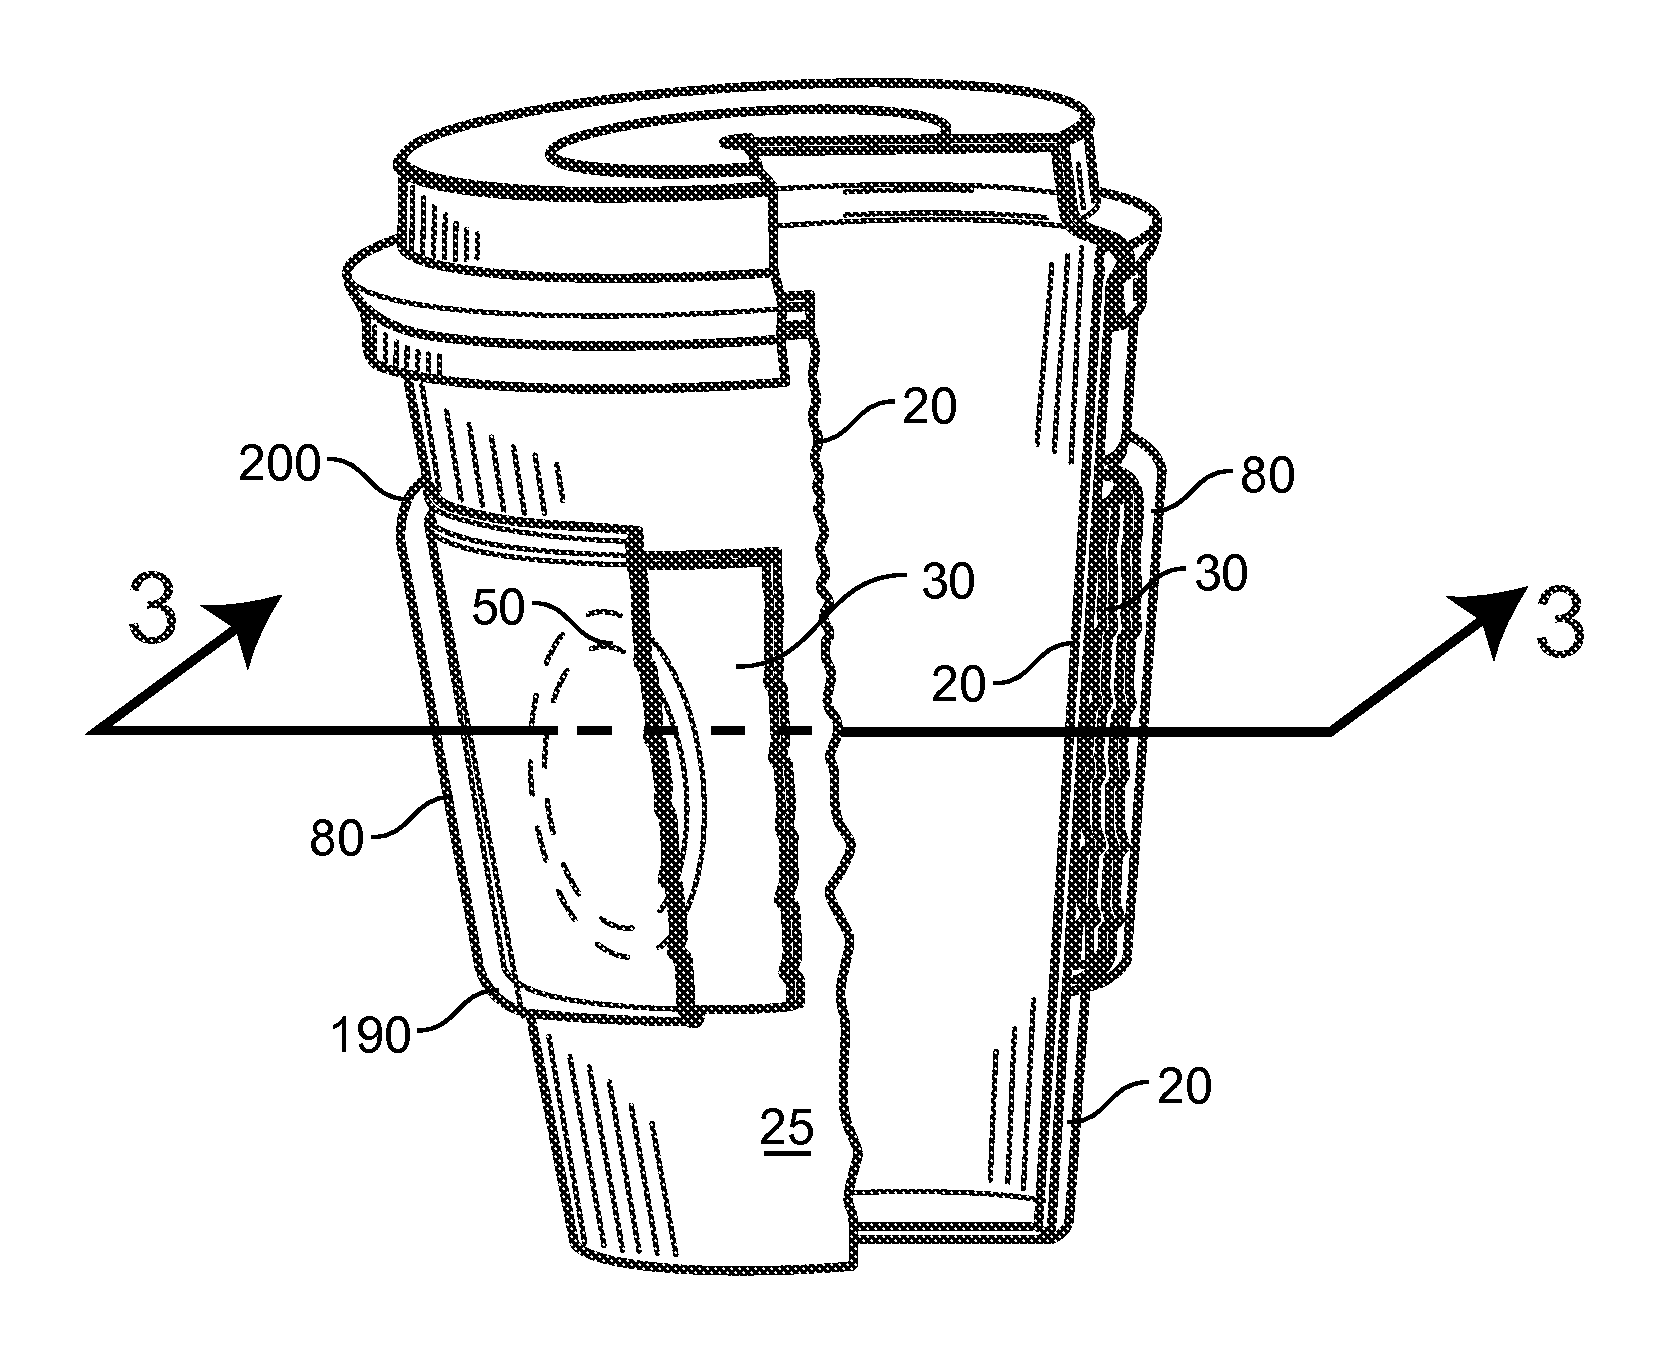 Insulator sleeve for a beverage container